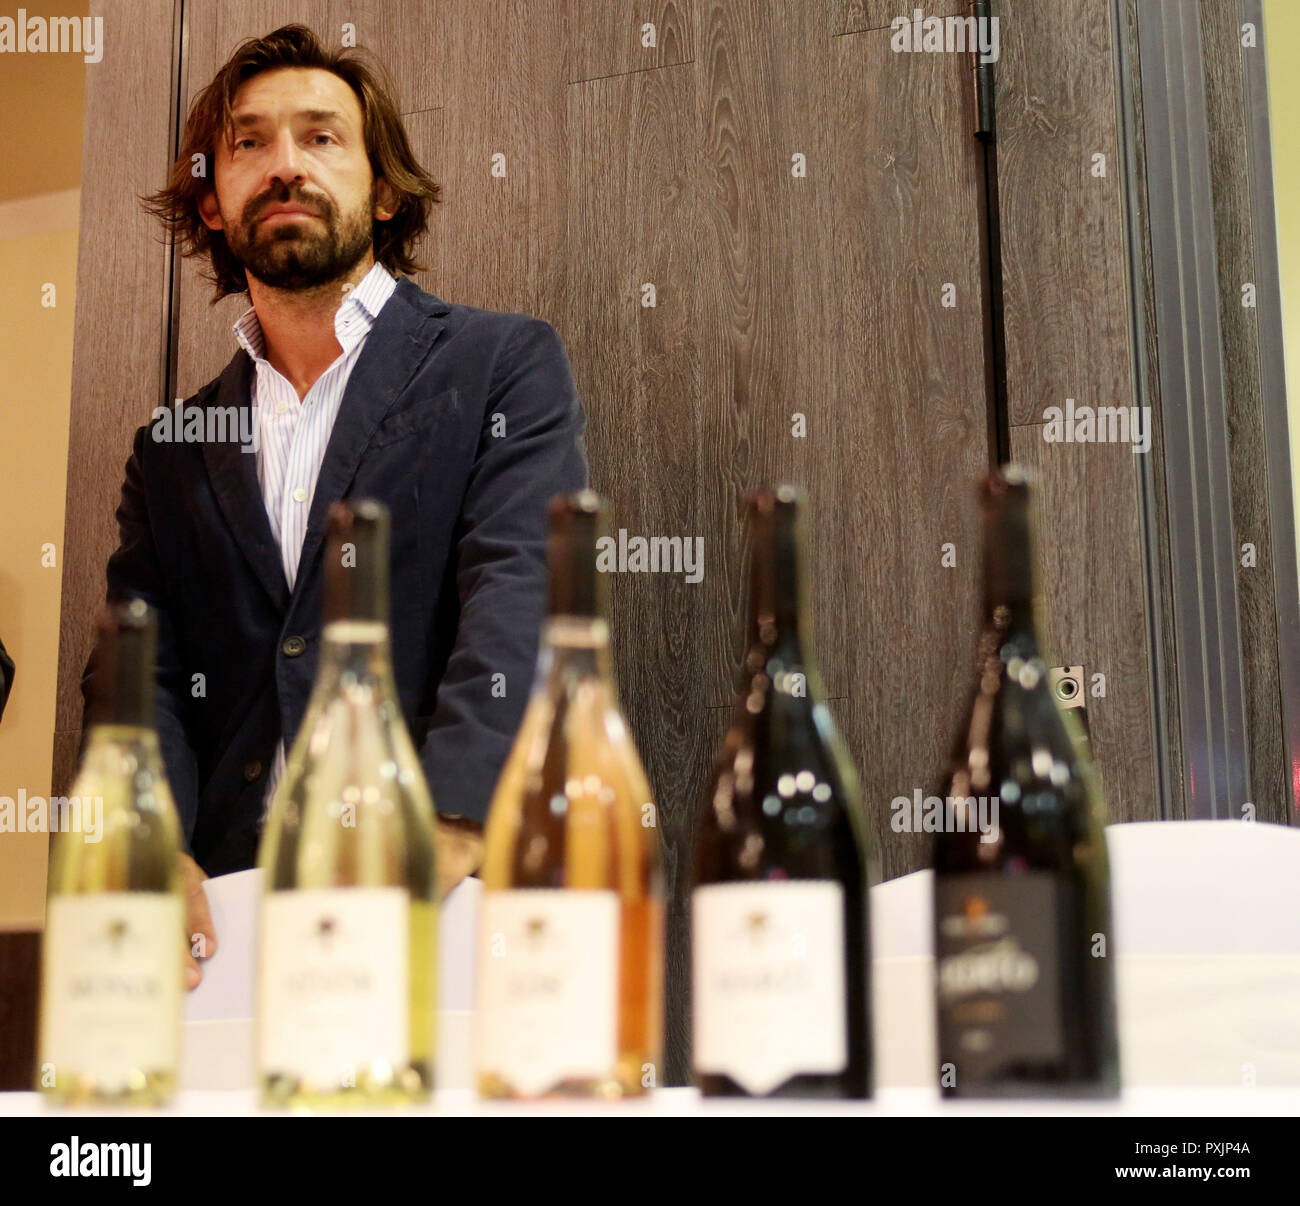 Duisburg, Germany. 22nd Oct, 2018. Andrea Pirlo, soccer world champion 2006 with Italy, stands at a wine presentation in a hotel. Last year he ended his career. Now the Pirlo is a winemaker. And presents his wines in the Italian World Cup quarter of 2006. (to dpa message: 'Drinking wine finally allowed: World Champion Pirlo is winegrower today' from 23.10.2018) Credit: Roland Weihrauch/dpa/Alamy Live News Stock Photo